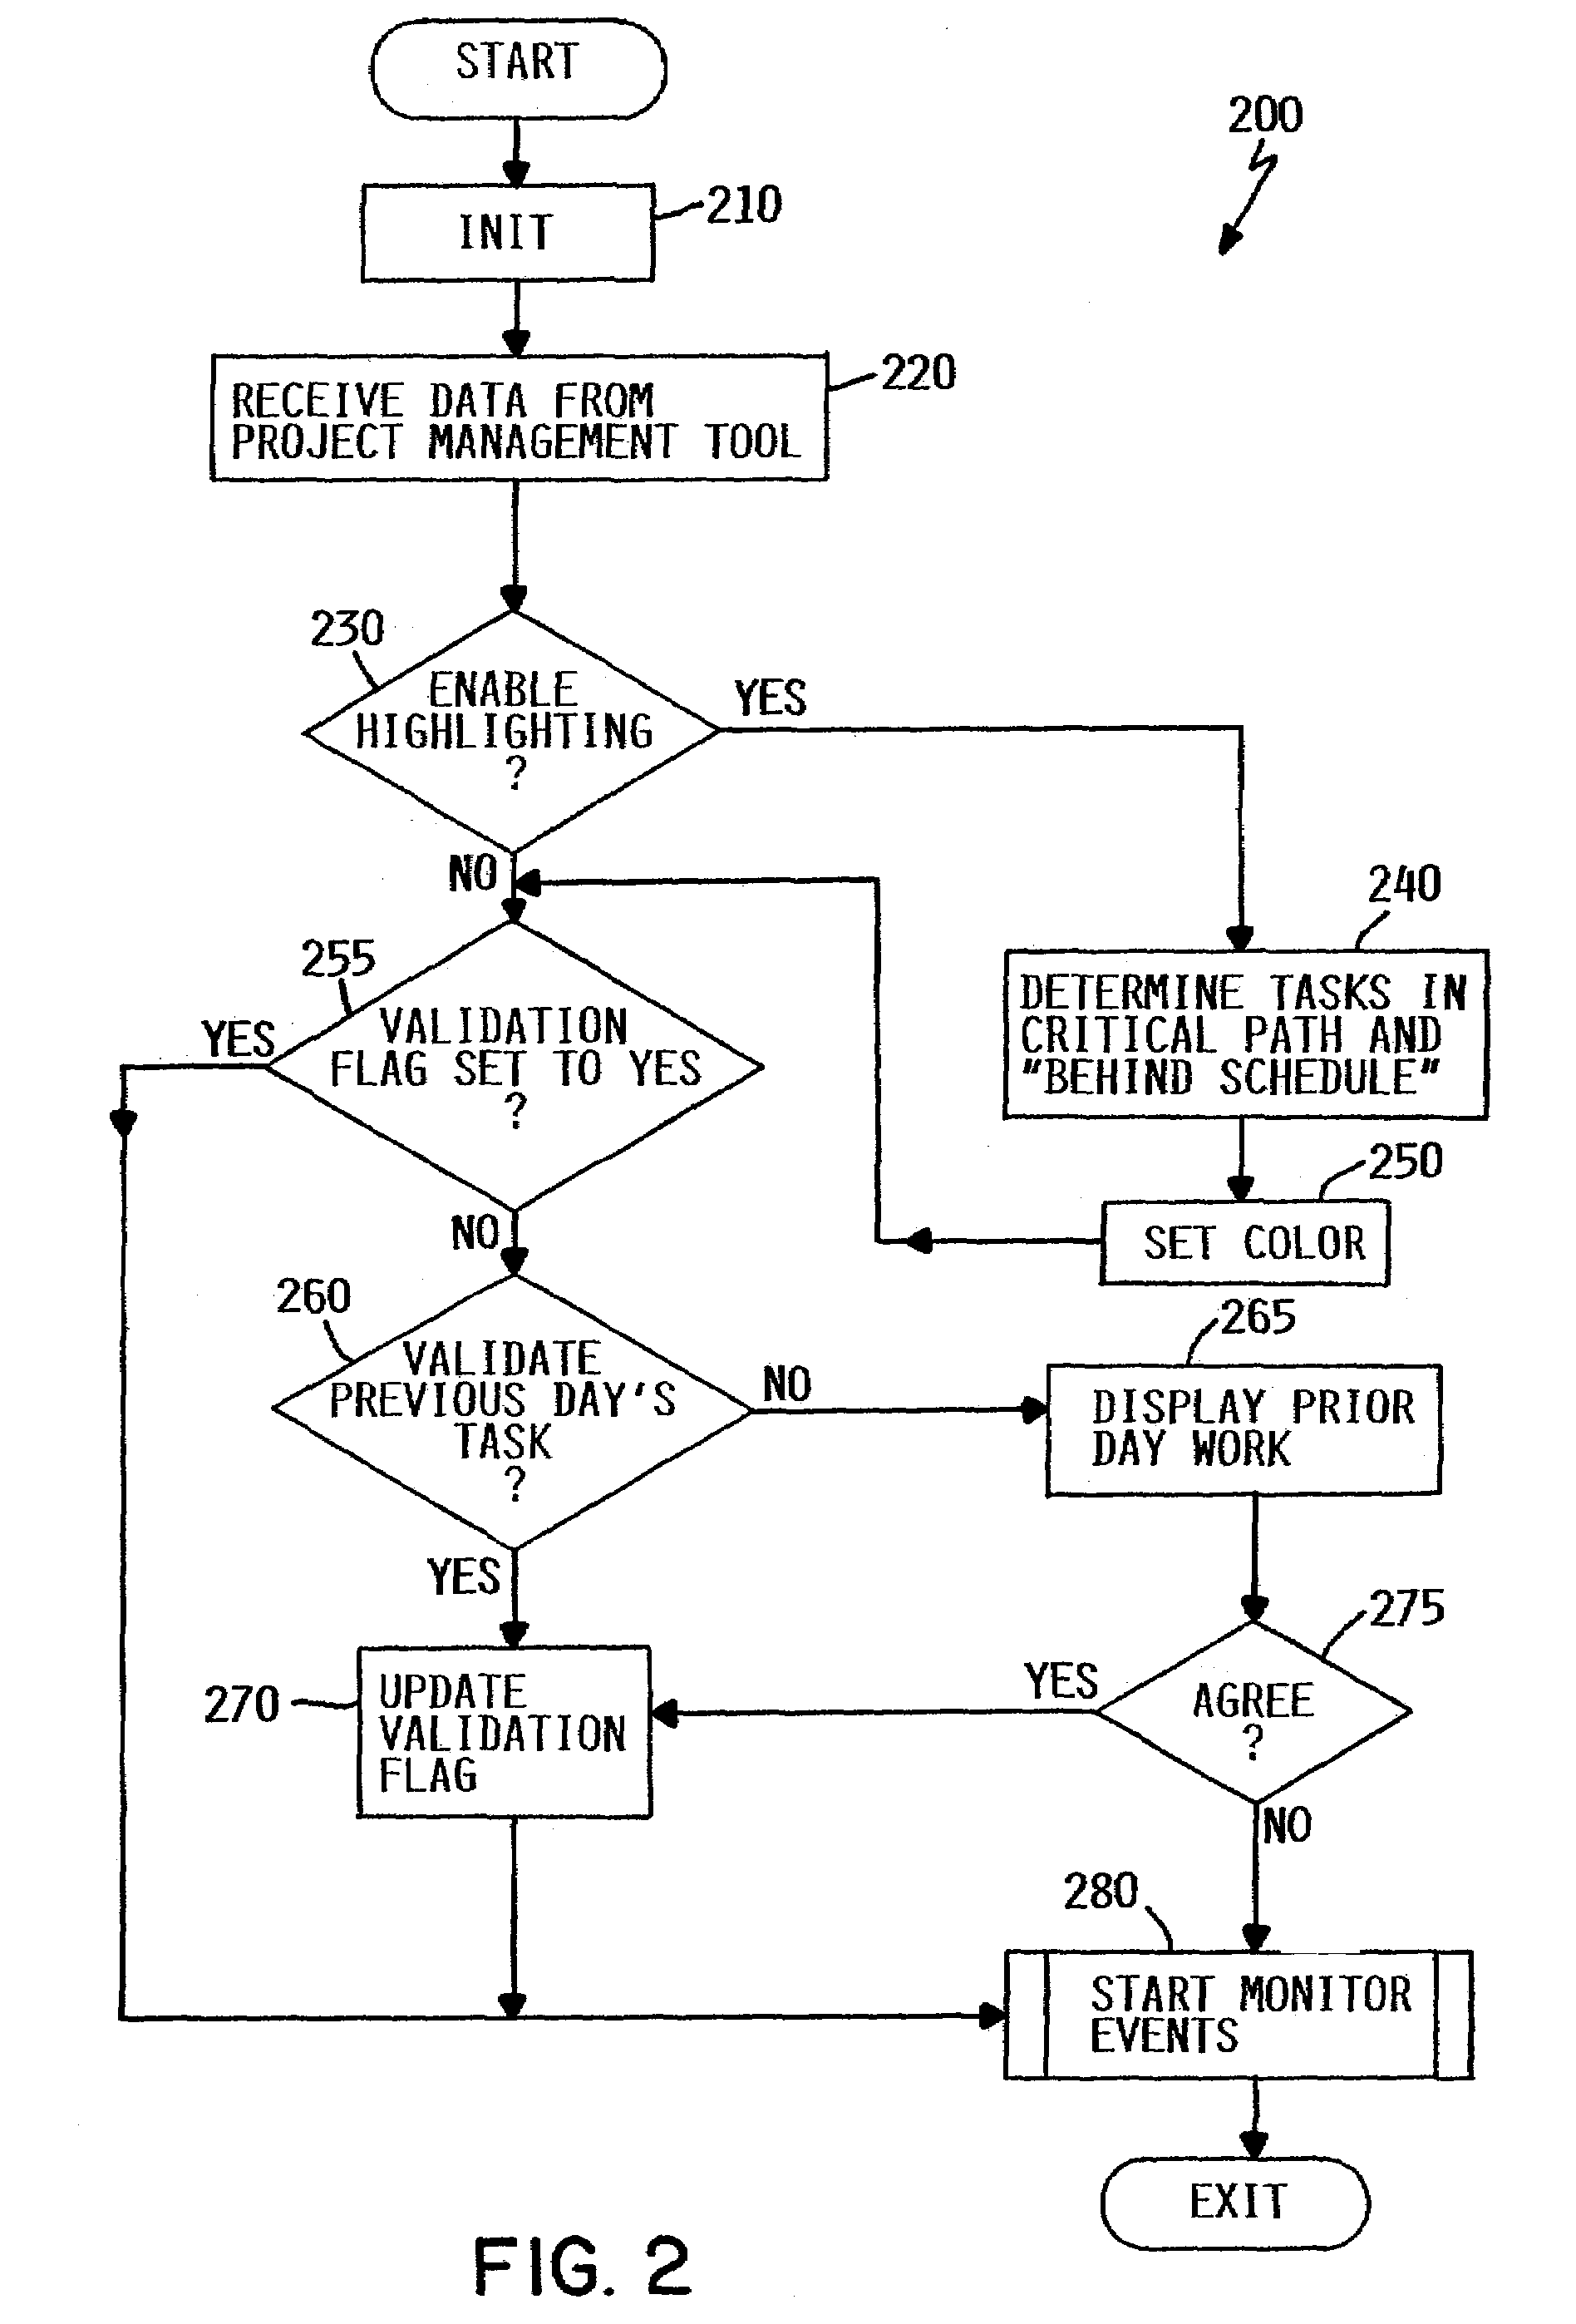 Integrated project management and development environment for determining the time expended on project tasks